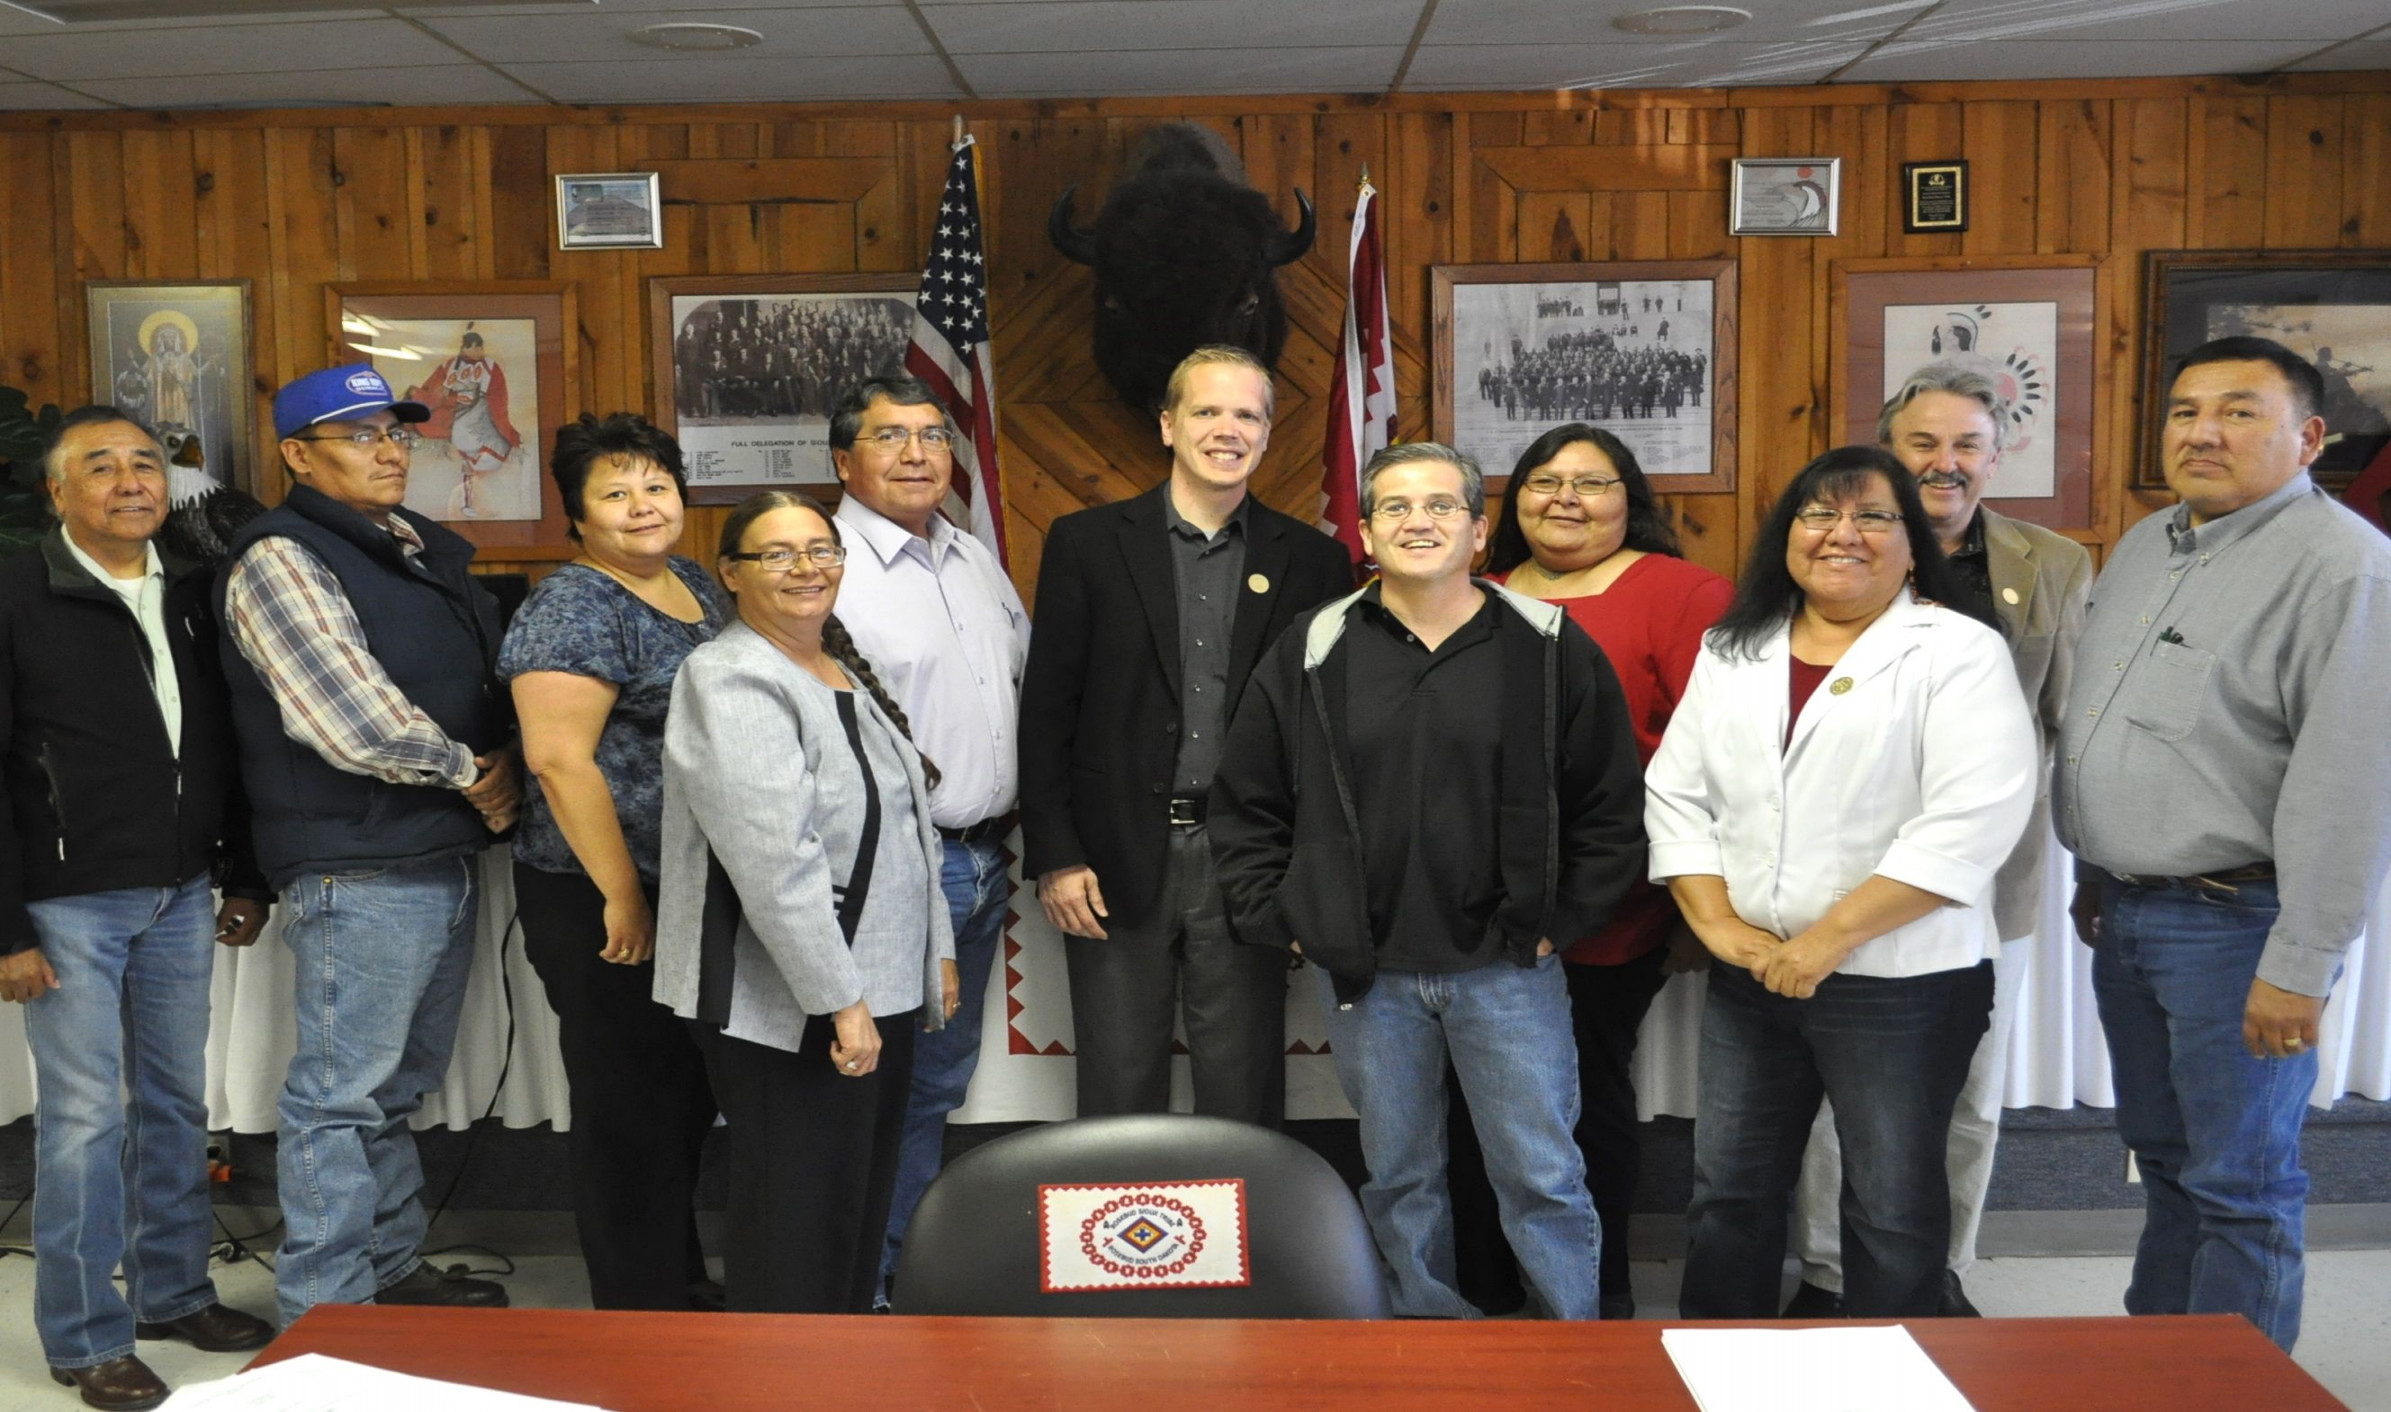 Working At Rosebud Sioux Tribe: Employee Reviews And Culture - Zippia